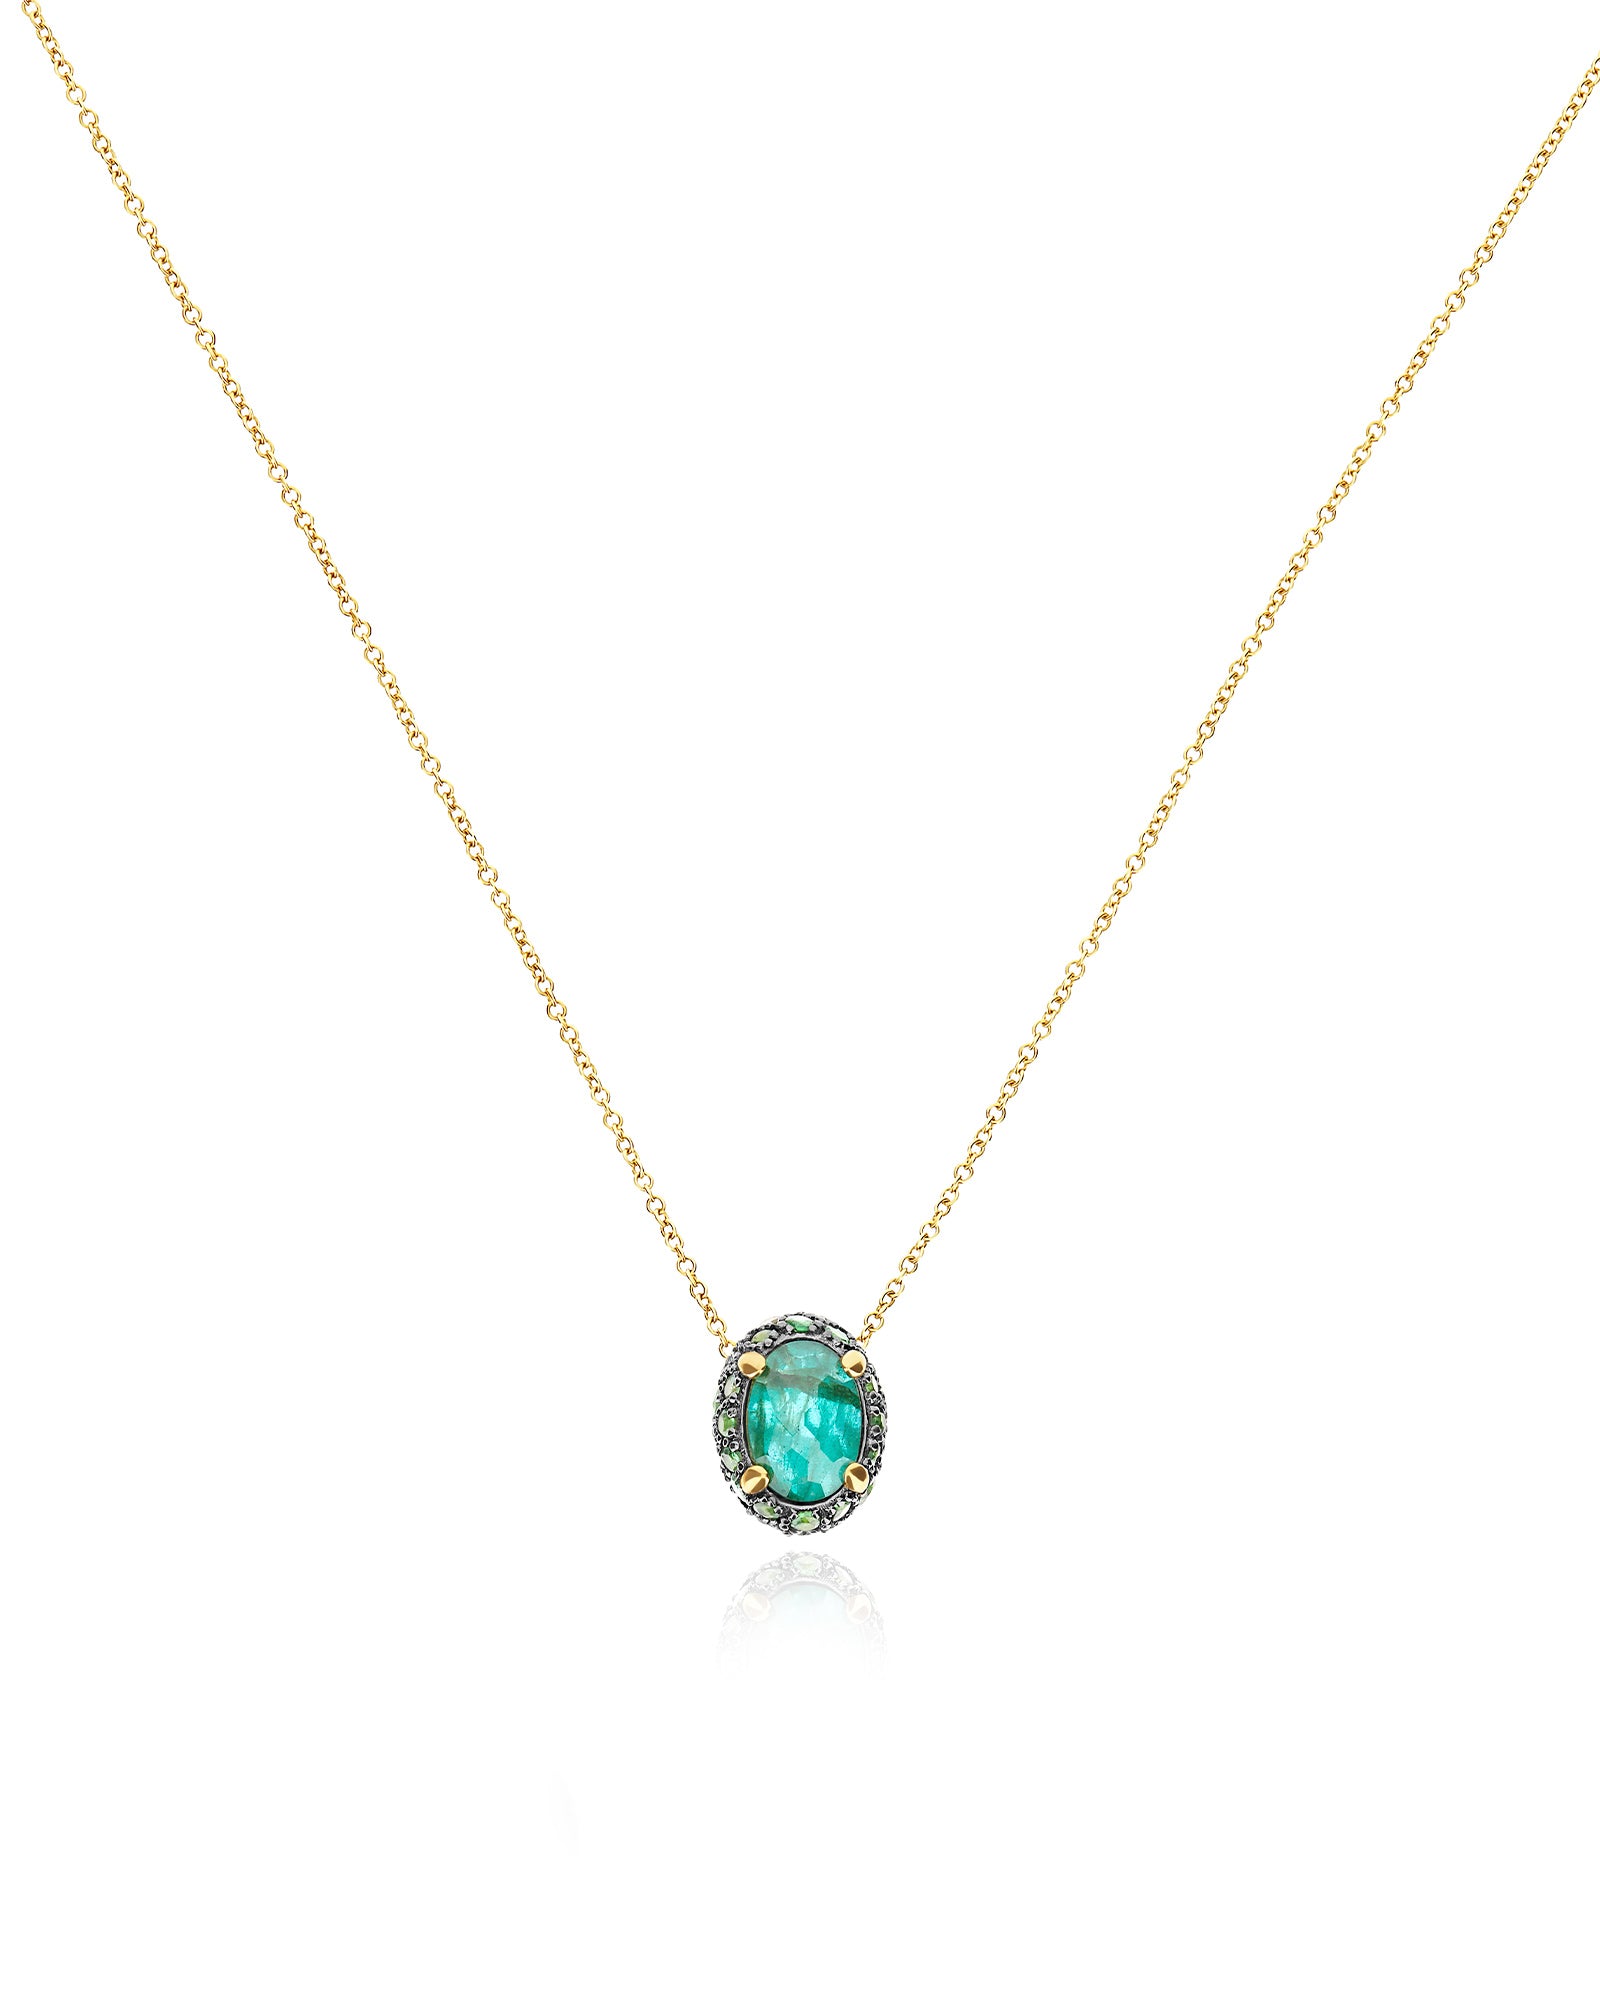 "Reverse" Gold, Sapphire, Tsavorite, Amethyst, Green Labradorite and Rock Crystal Double-face Necklace